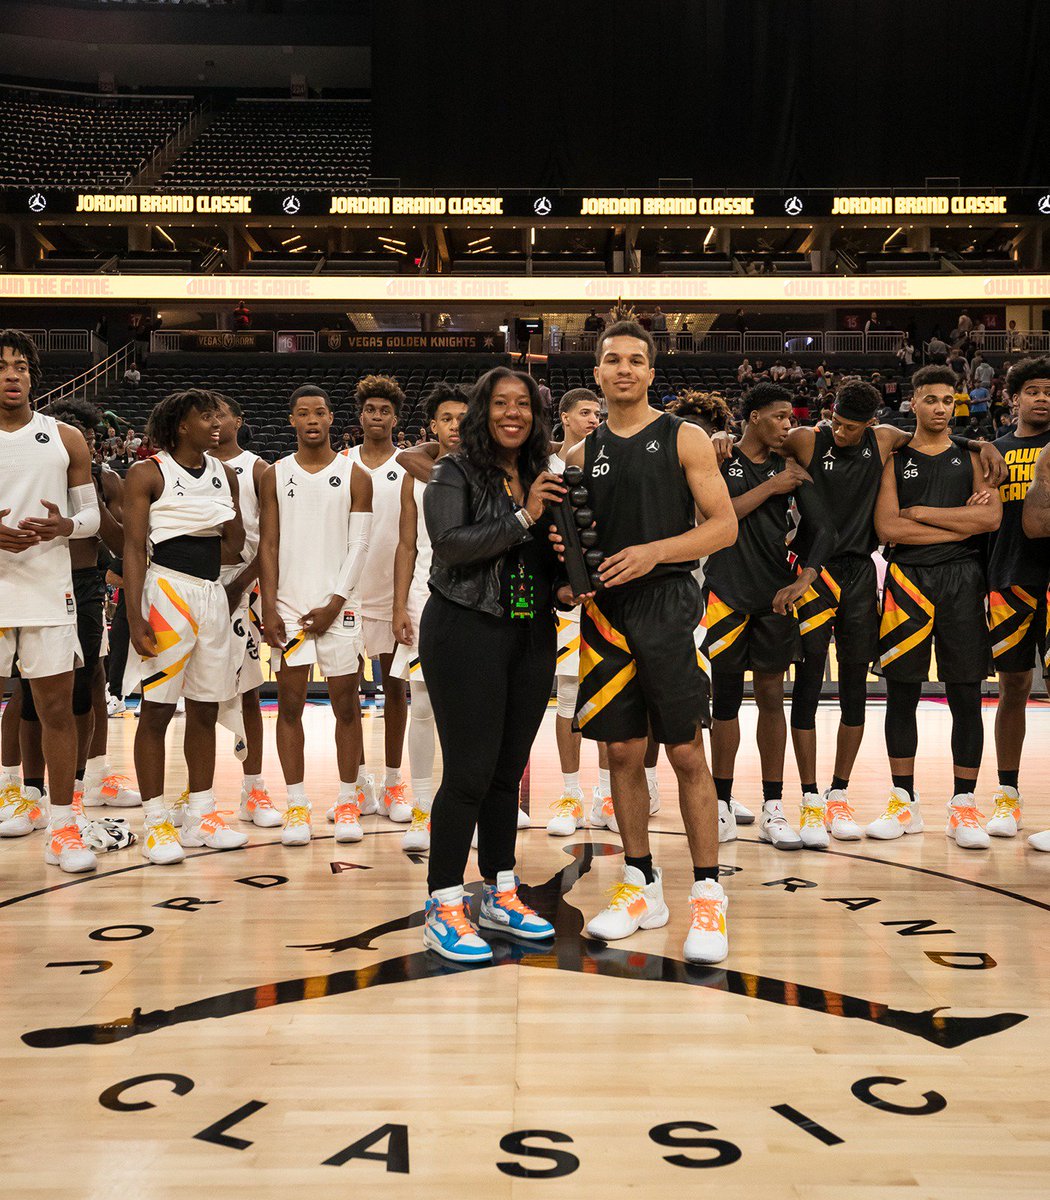 Owned the game. The Boys MVPs left it all on the court at this year’s Jordan Brand Classic.